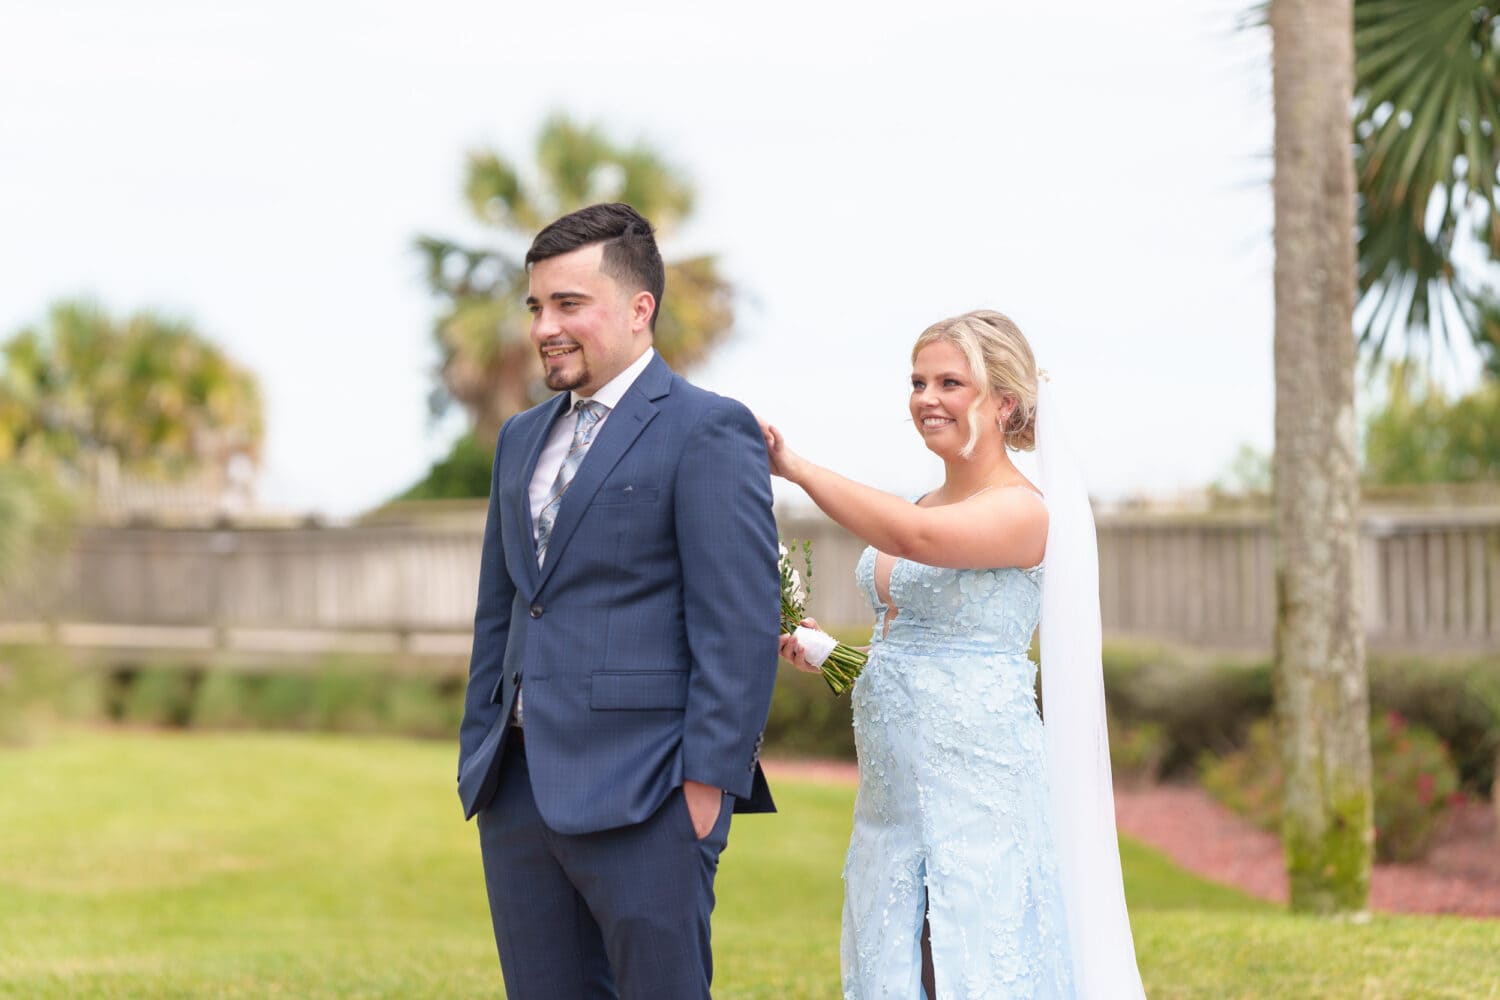 First look with the bride and groom - Hilton Myrtle Beach Resort